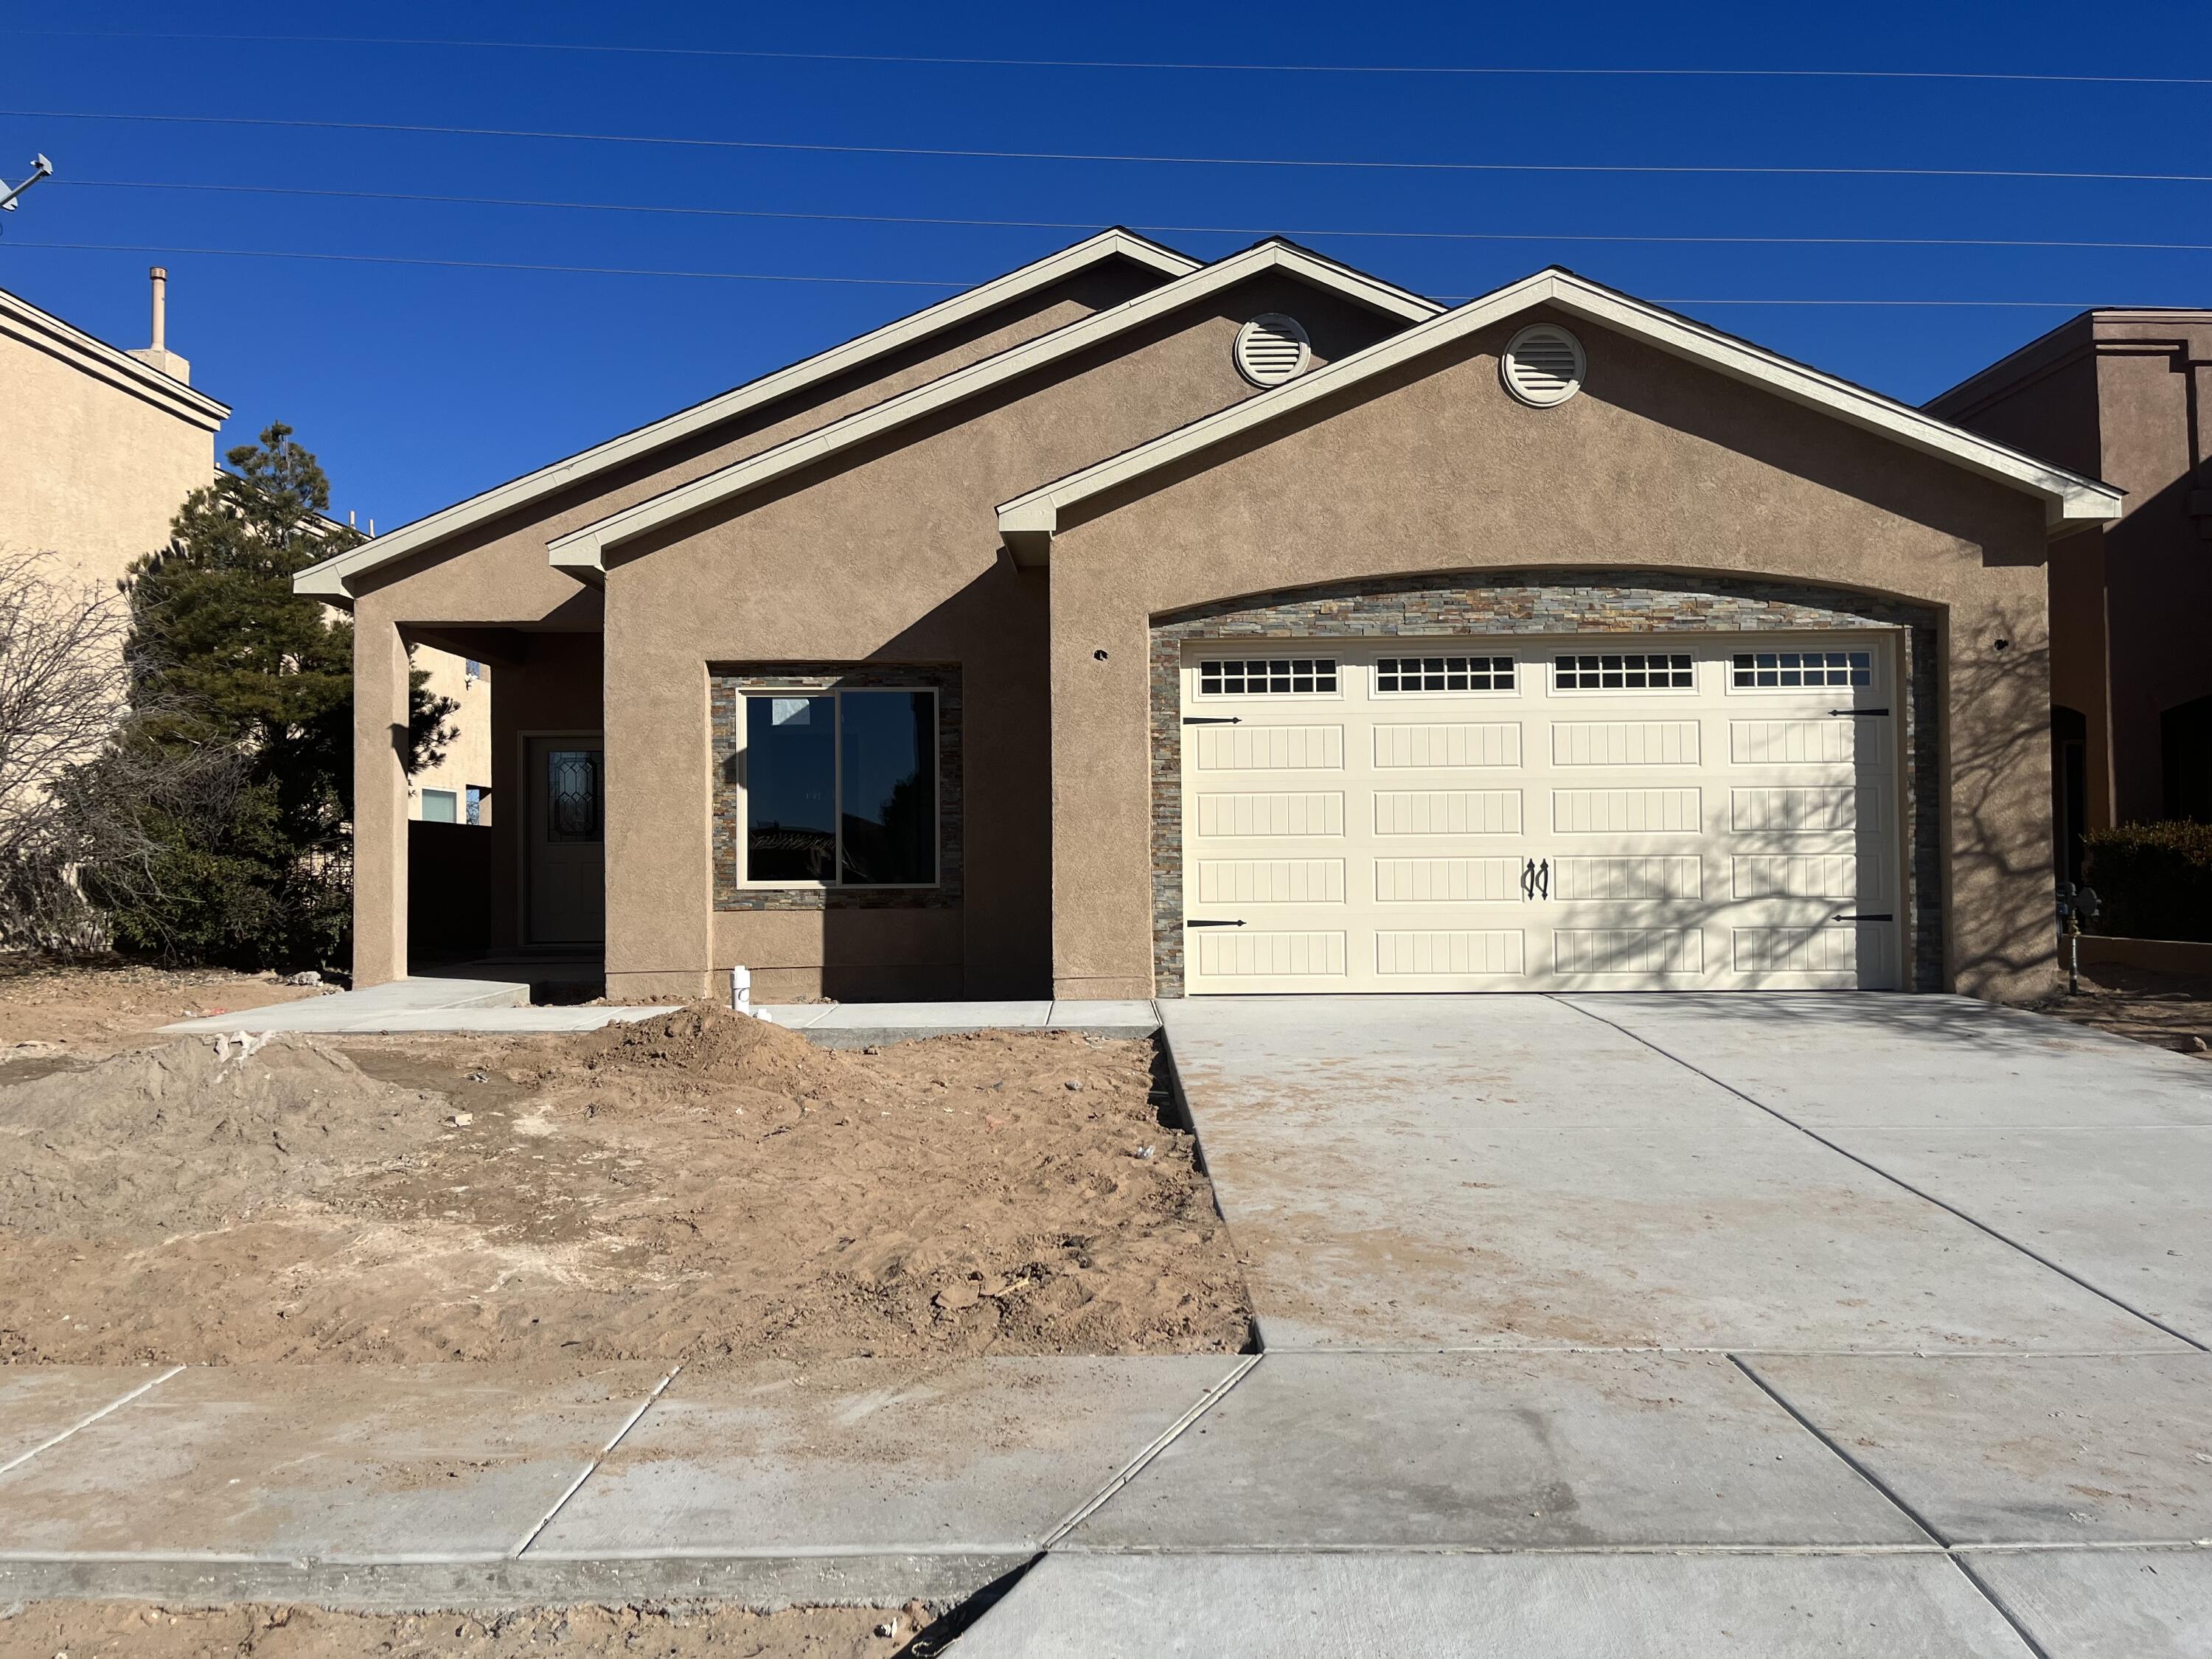 Come take a look at this newly constructed home which is located in the heart of New Mexico's fastest growing employment HUB's and one of the few gated communities in Los Lunas! This property has beautiful granite counter tops throughout, modern tile floors in all common areas, cozy gas fireplace and a walled in backyard just to mention a few of the great features. BONUS this home is also built on an upgraded post tension slab.